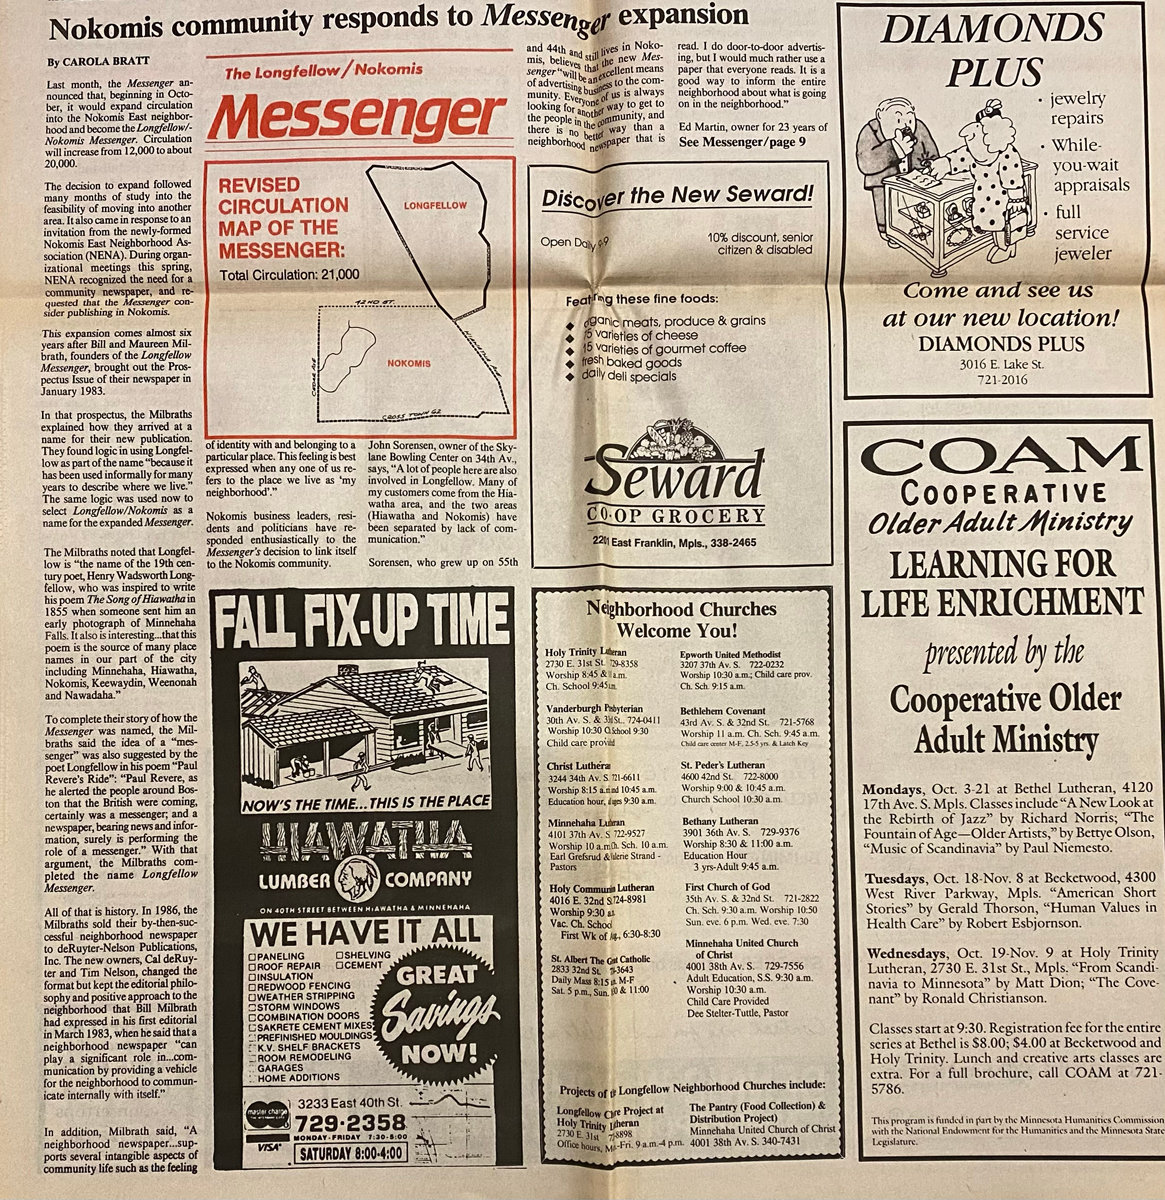 "Nokomis community responds to Messenger expansion" by Carola Bratt is printed in the October 1988 edition. There are 2 jumps.